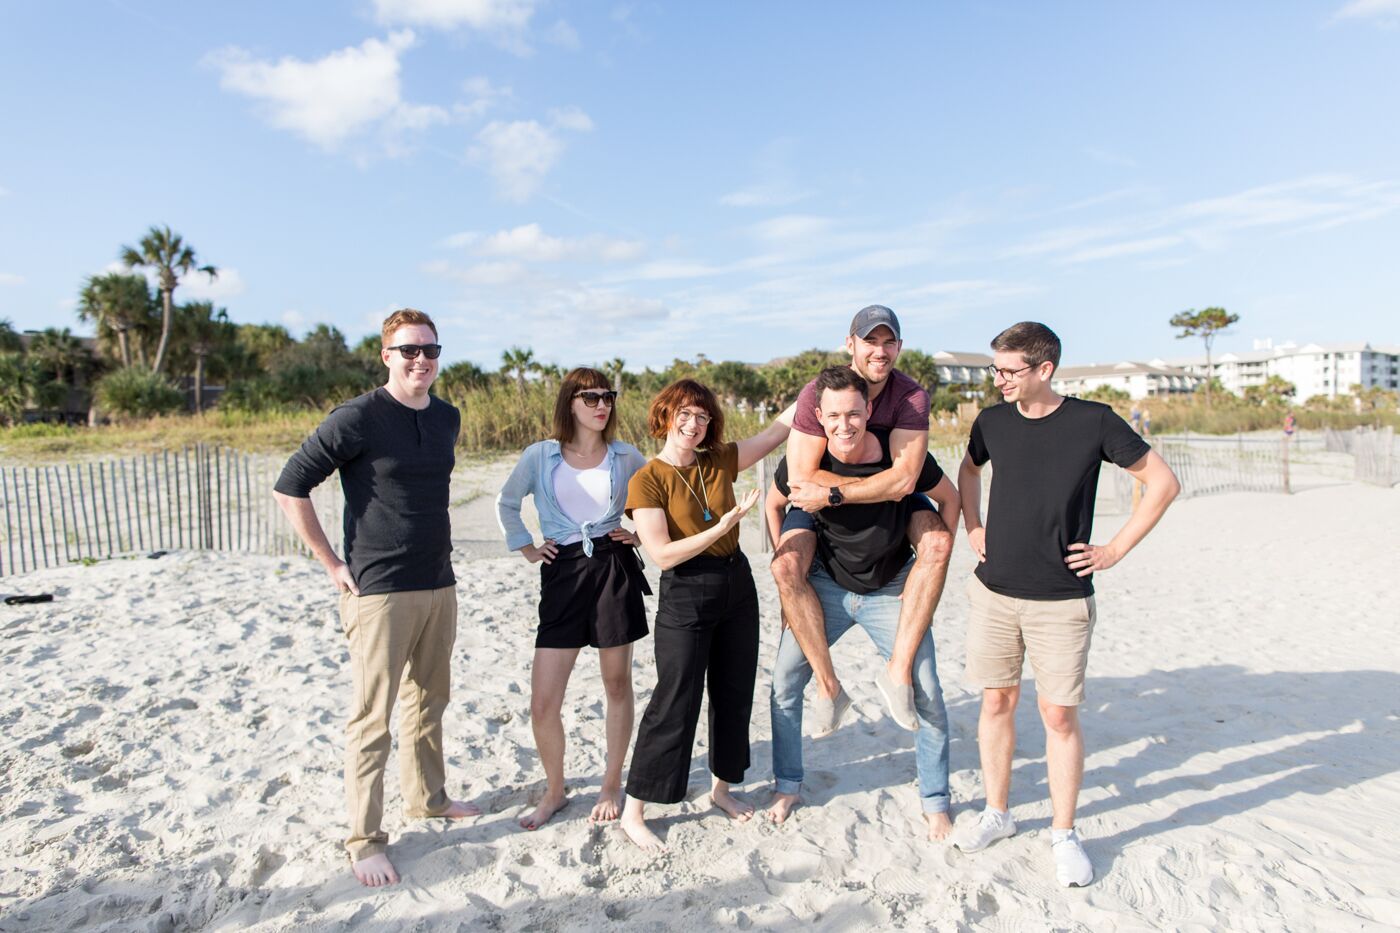 THelp Scout design team at the offsite in Hilton Head, SC, posing on the beach. There is one person piggybacking another.